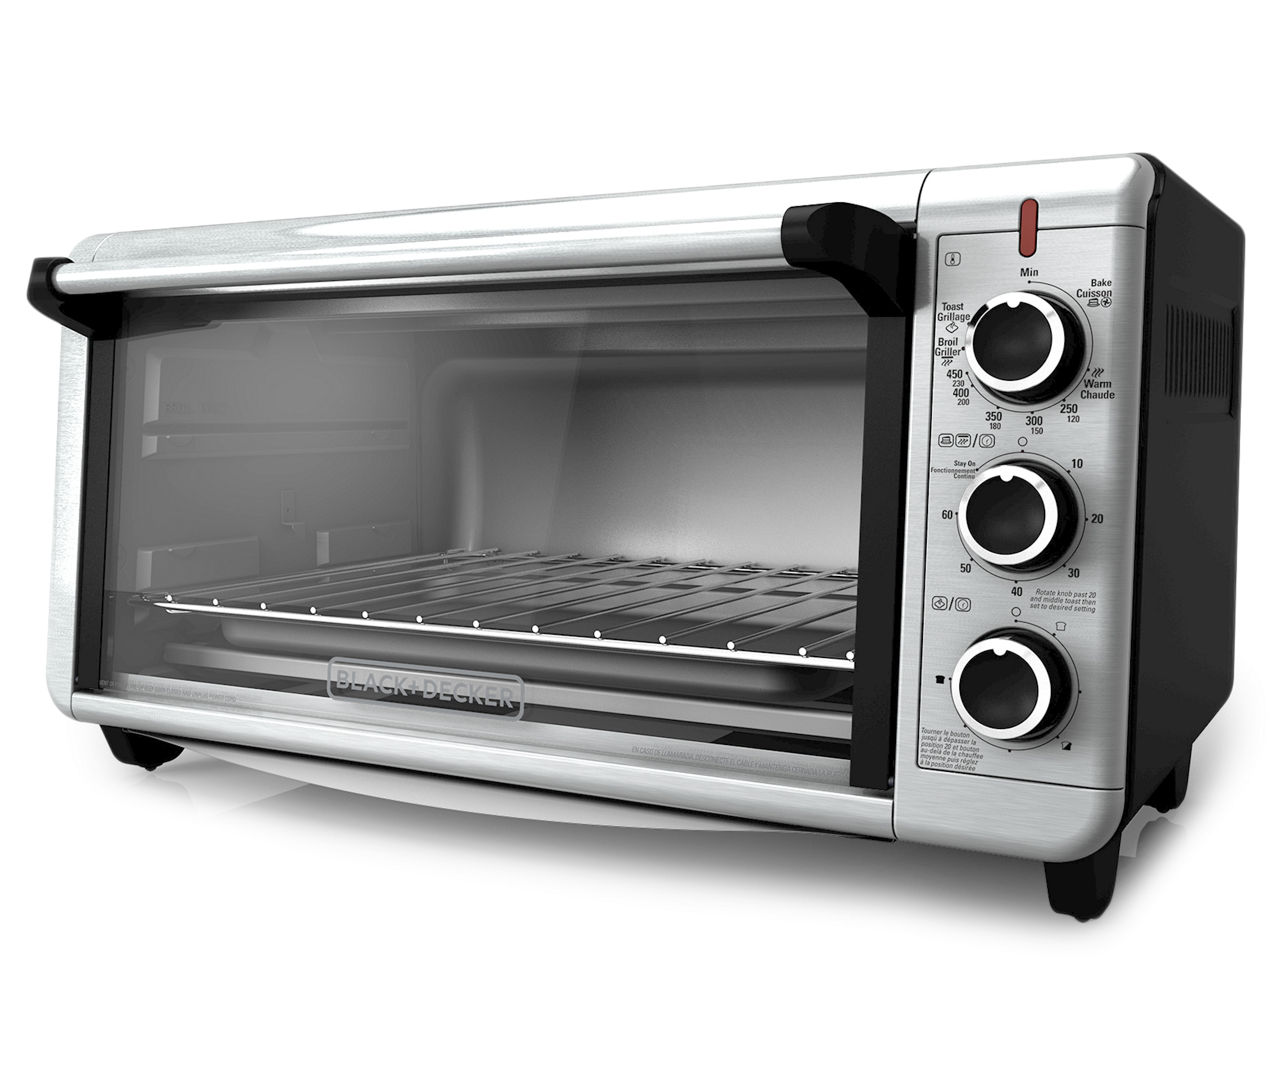 Black + Decker Countertop Convection Toaster Oven Stainless Steel